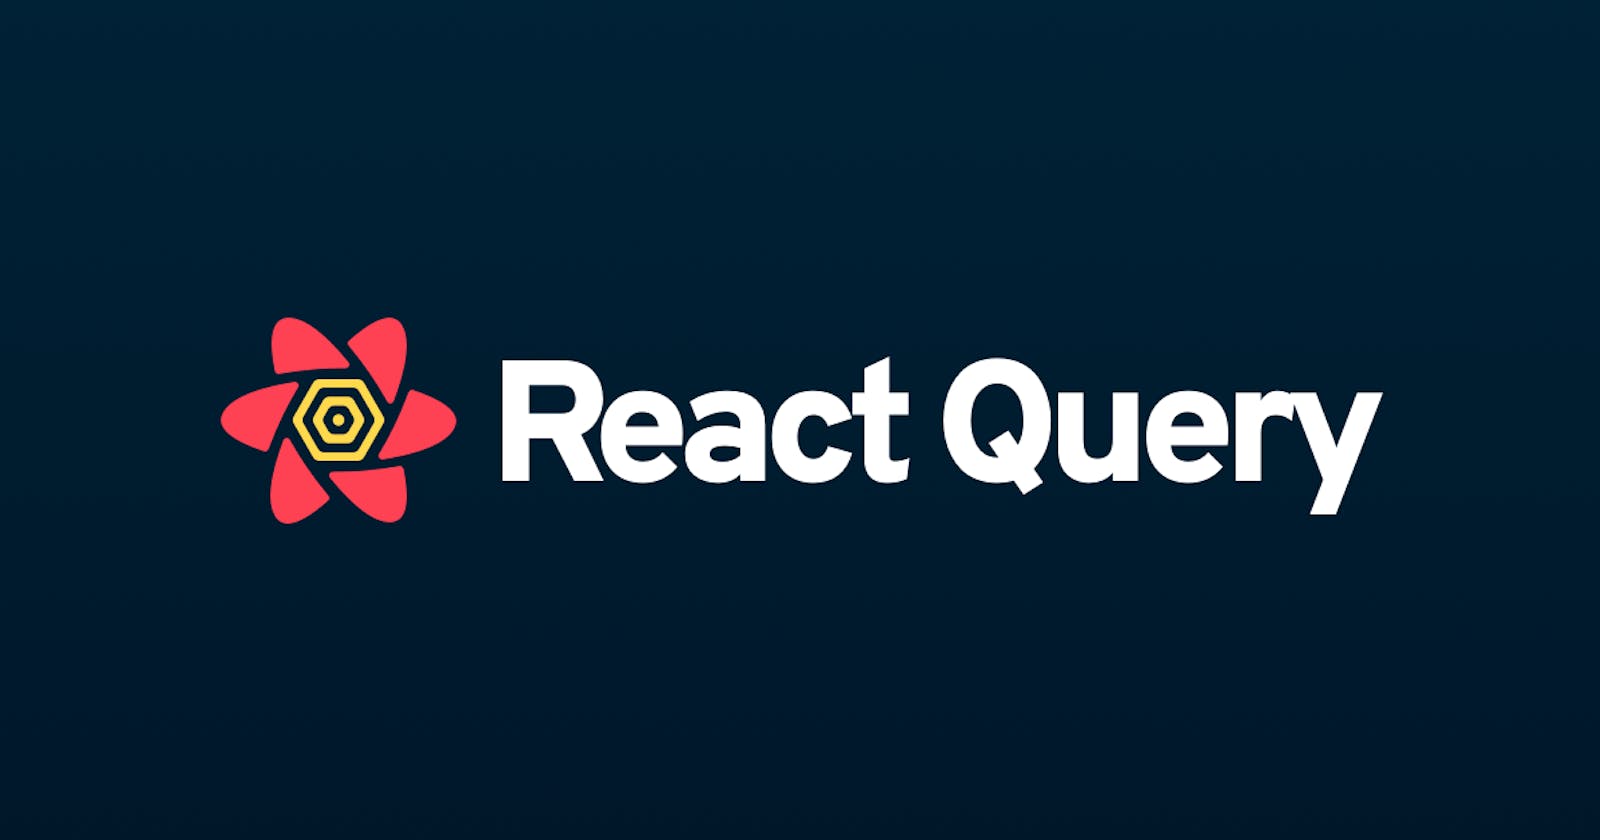 A short introduction to React Query